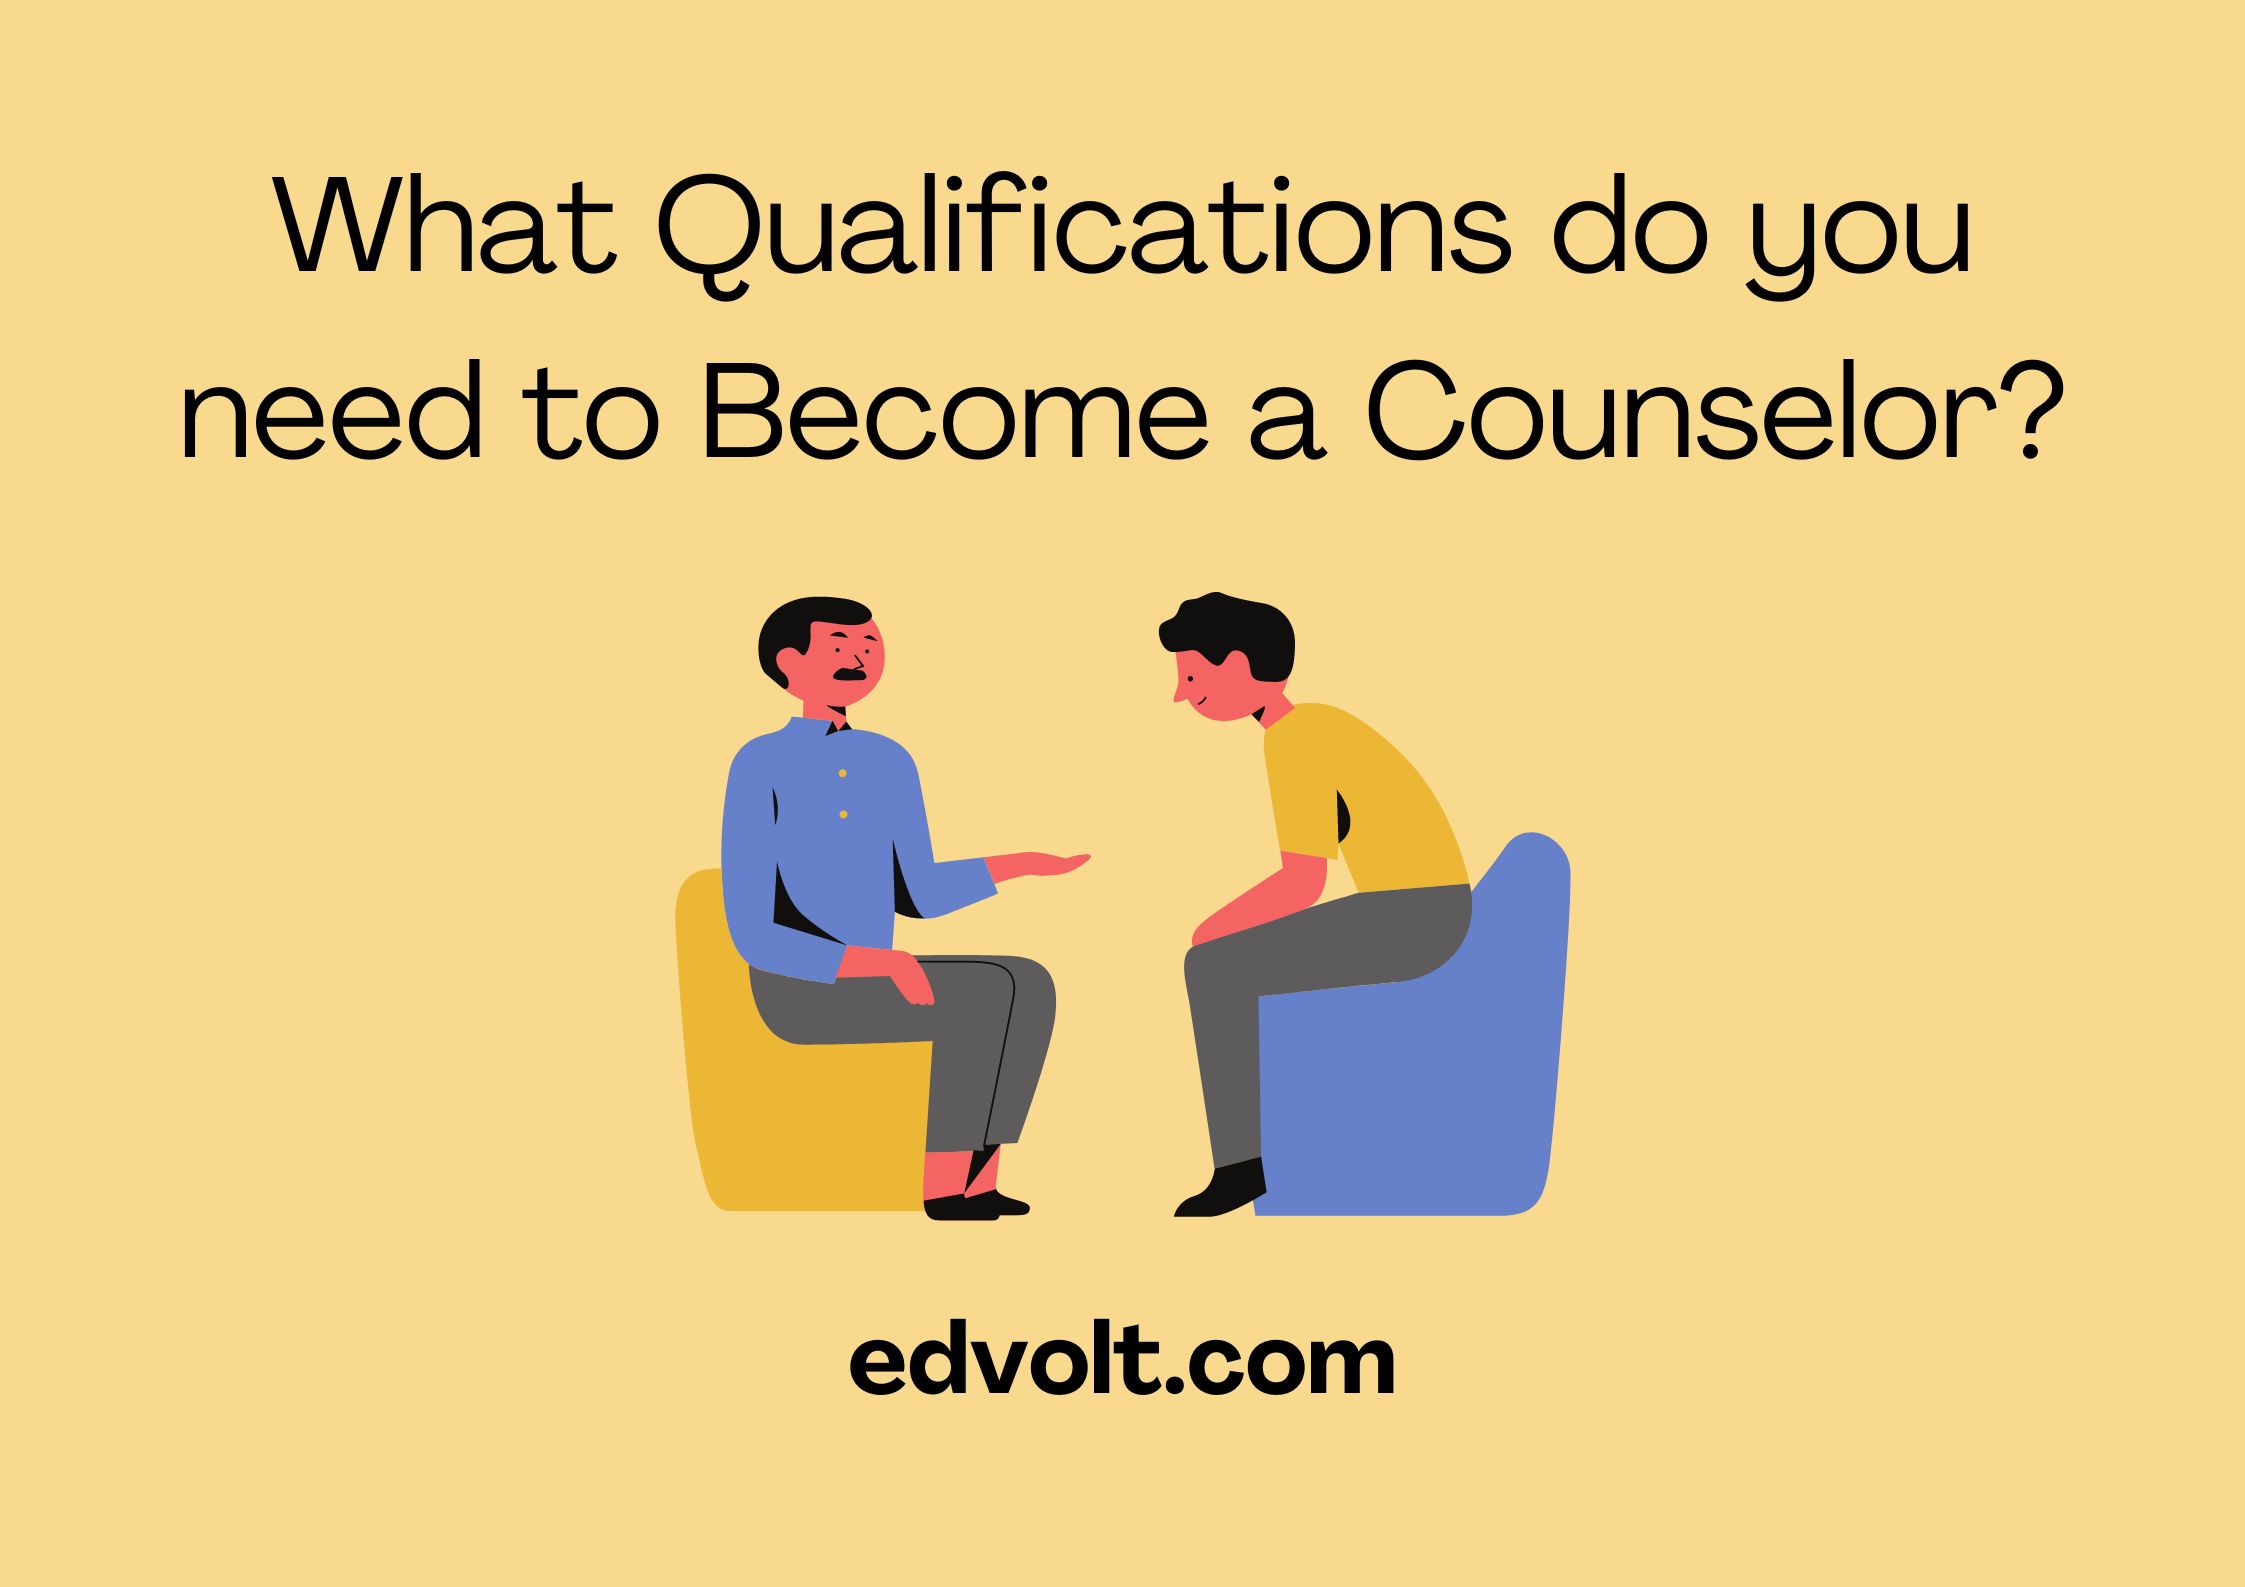 What Qualifications do you need to Become a Counselor?